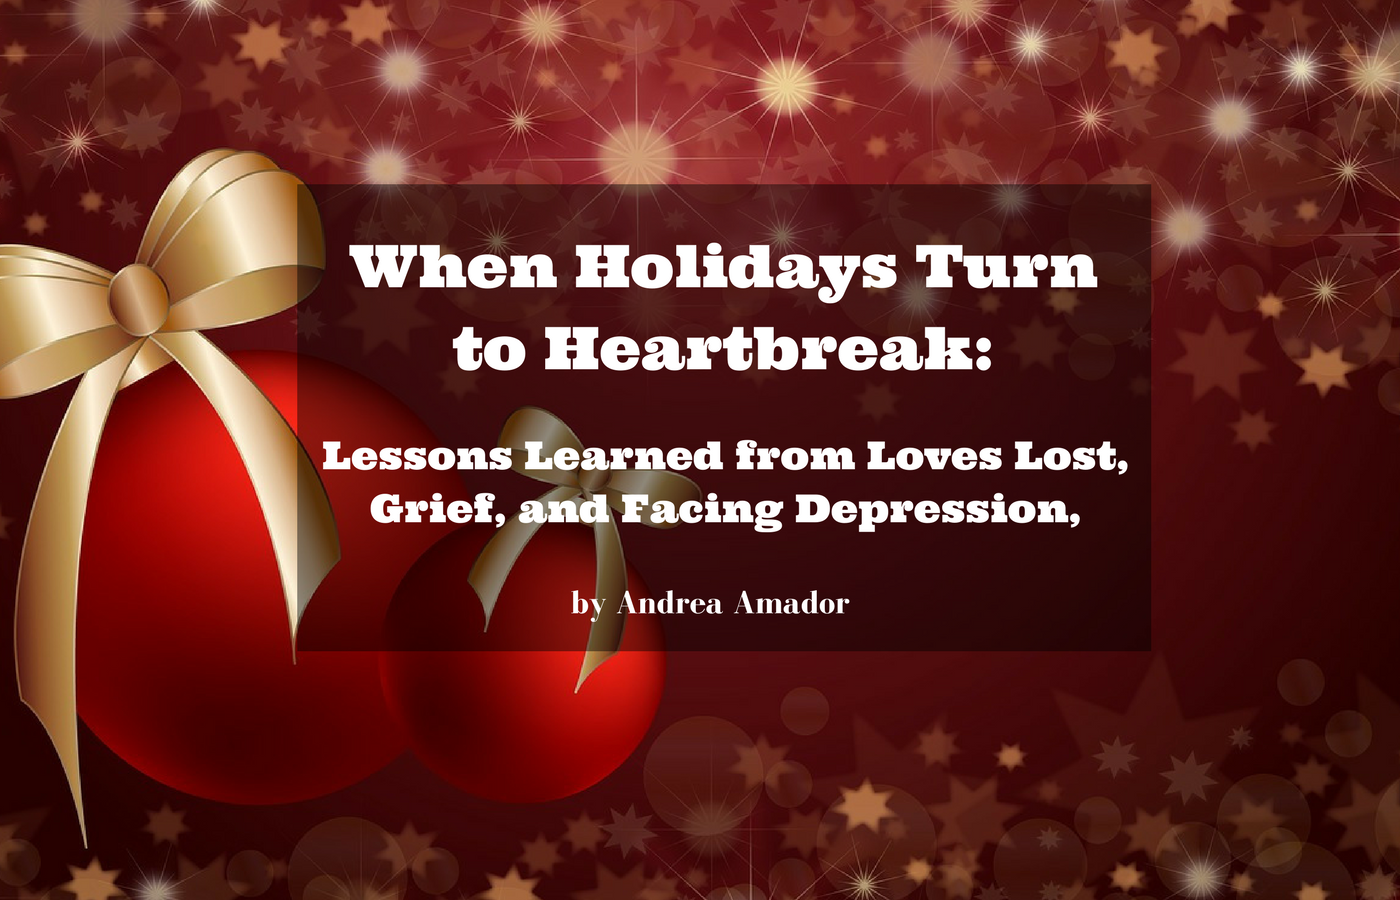 When Holidays Turn to Heartbreak: Lessons Learned from Loves Lost, Grief, and Facing Depression